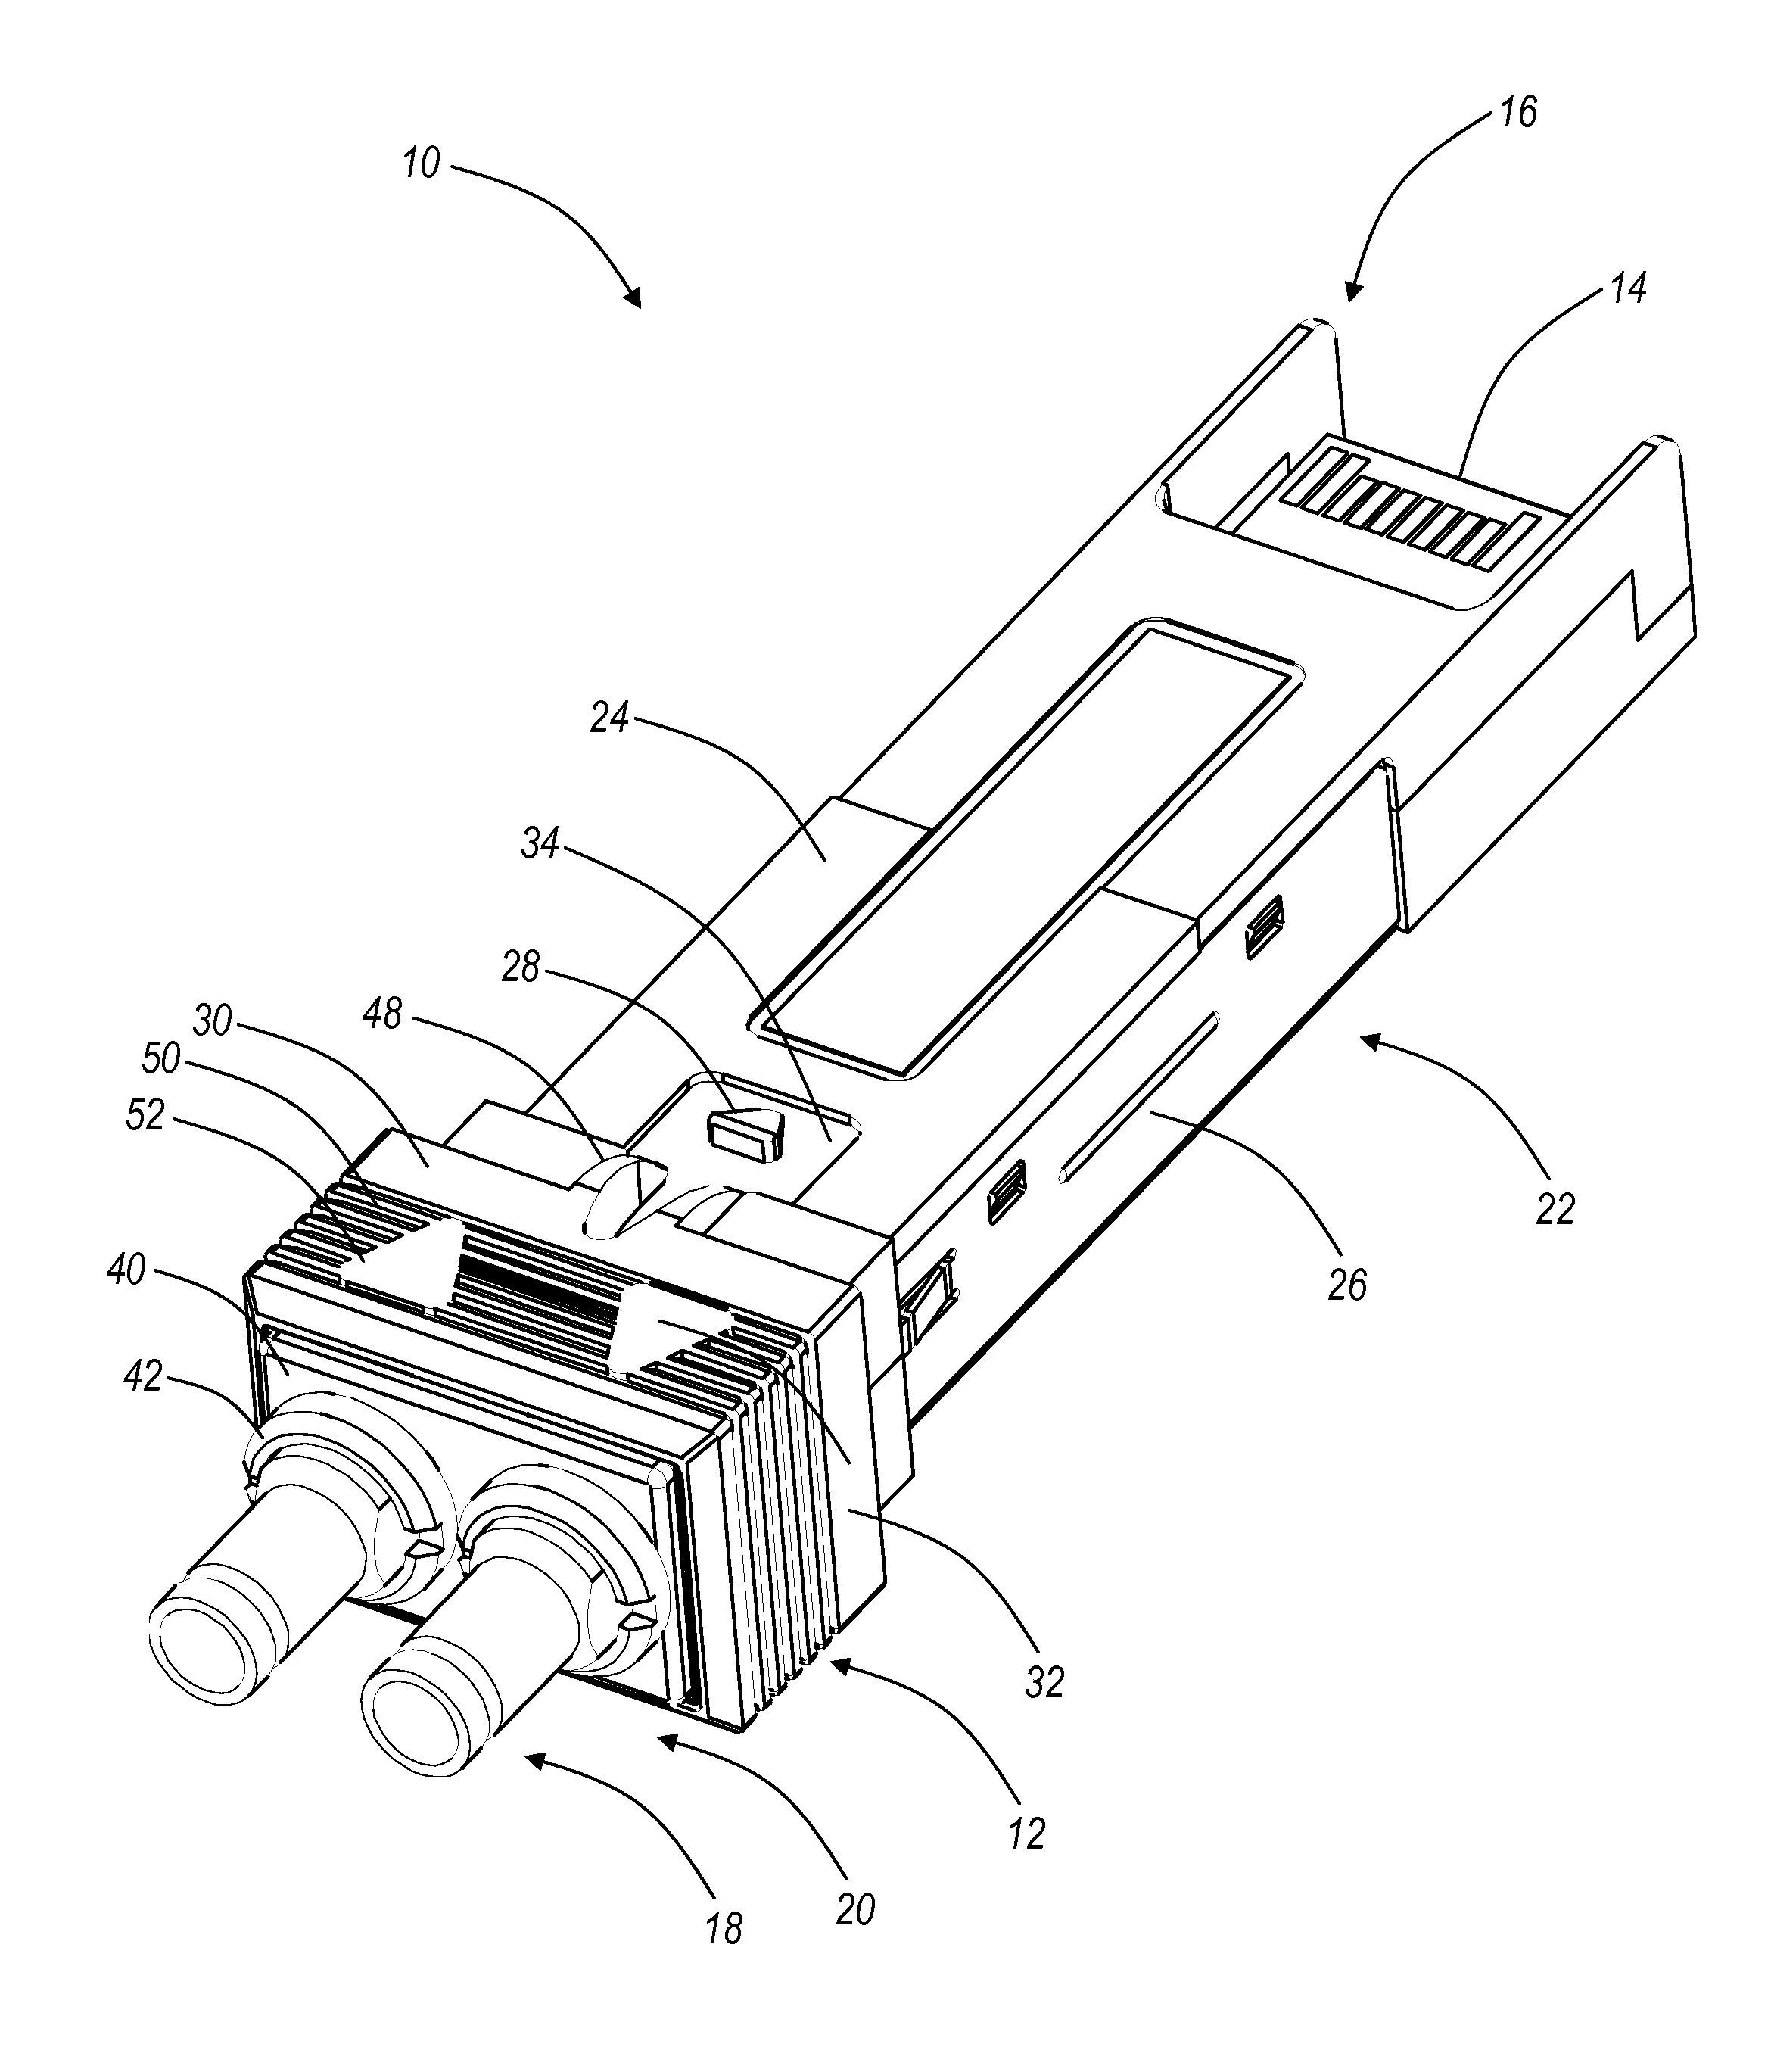 Ejector apparatus and associated assembly method for pluggable transceivers